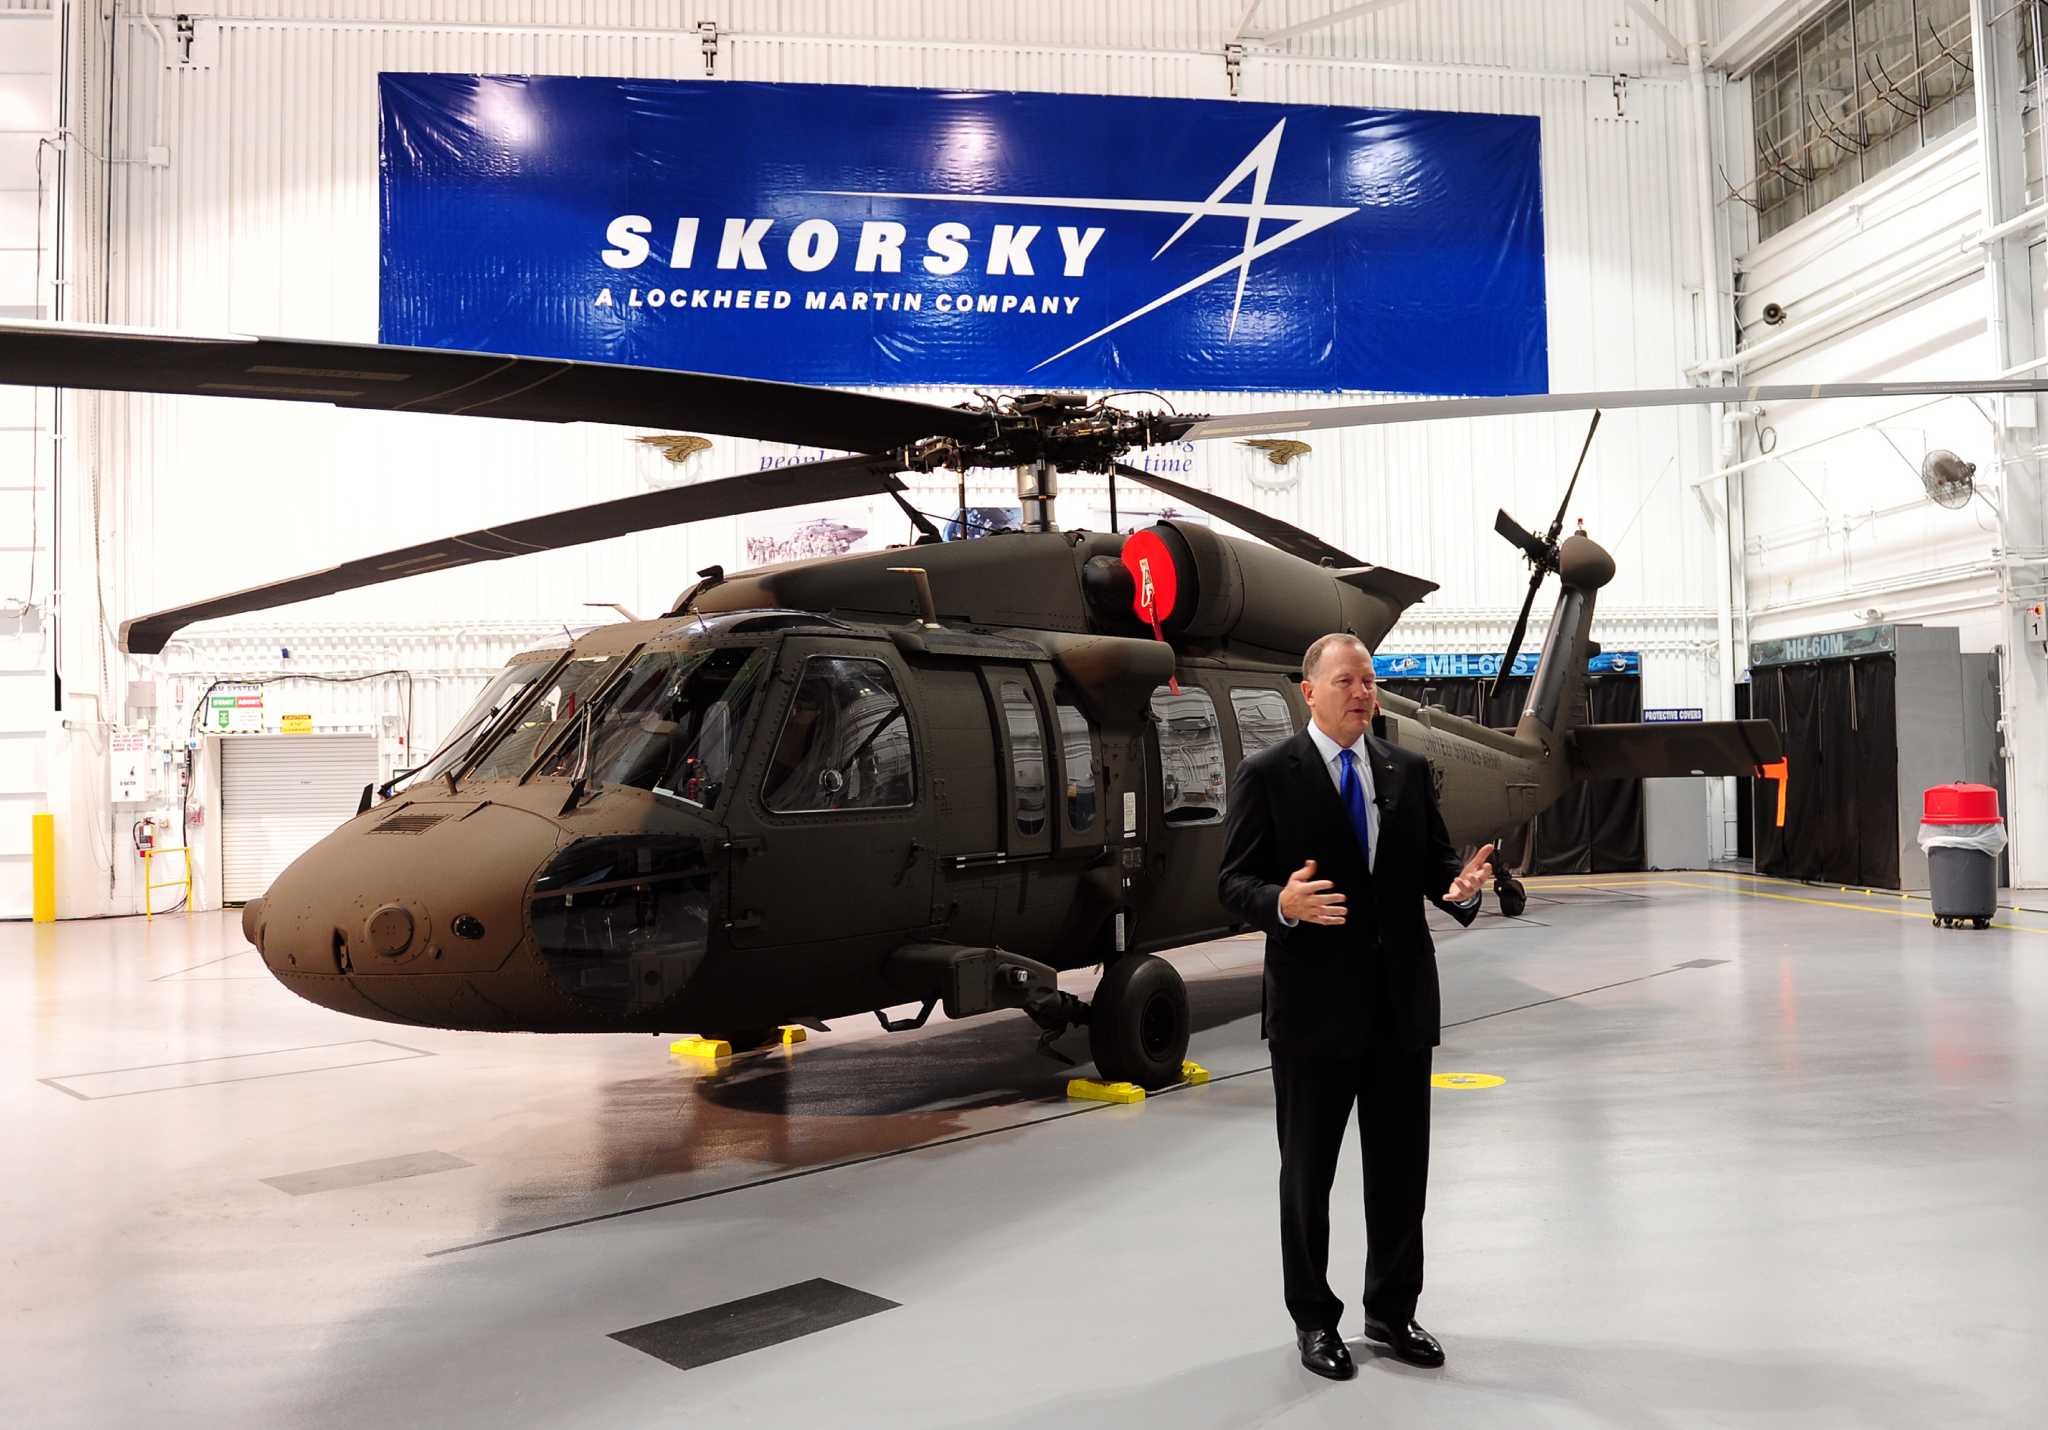 Sikorsky Logo - Lockheed Martin commits to Sikorsky future in Stratford ...